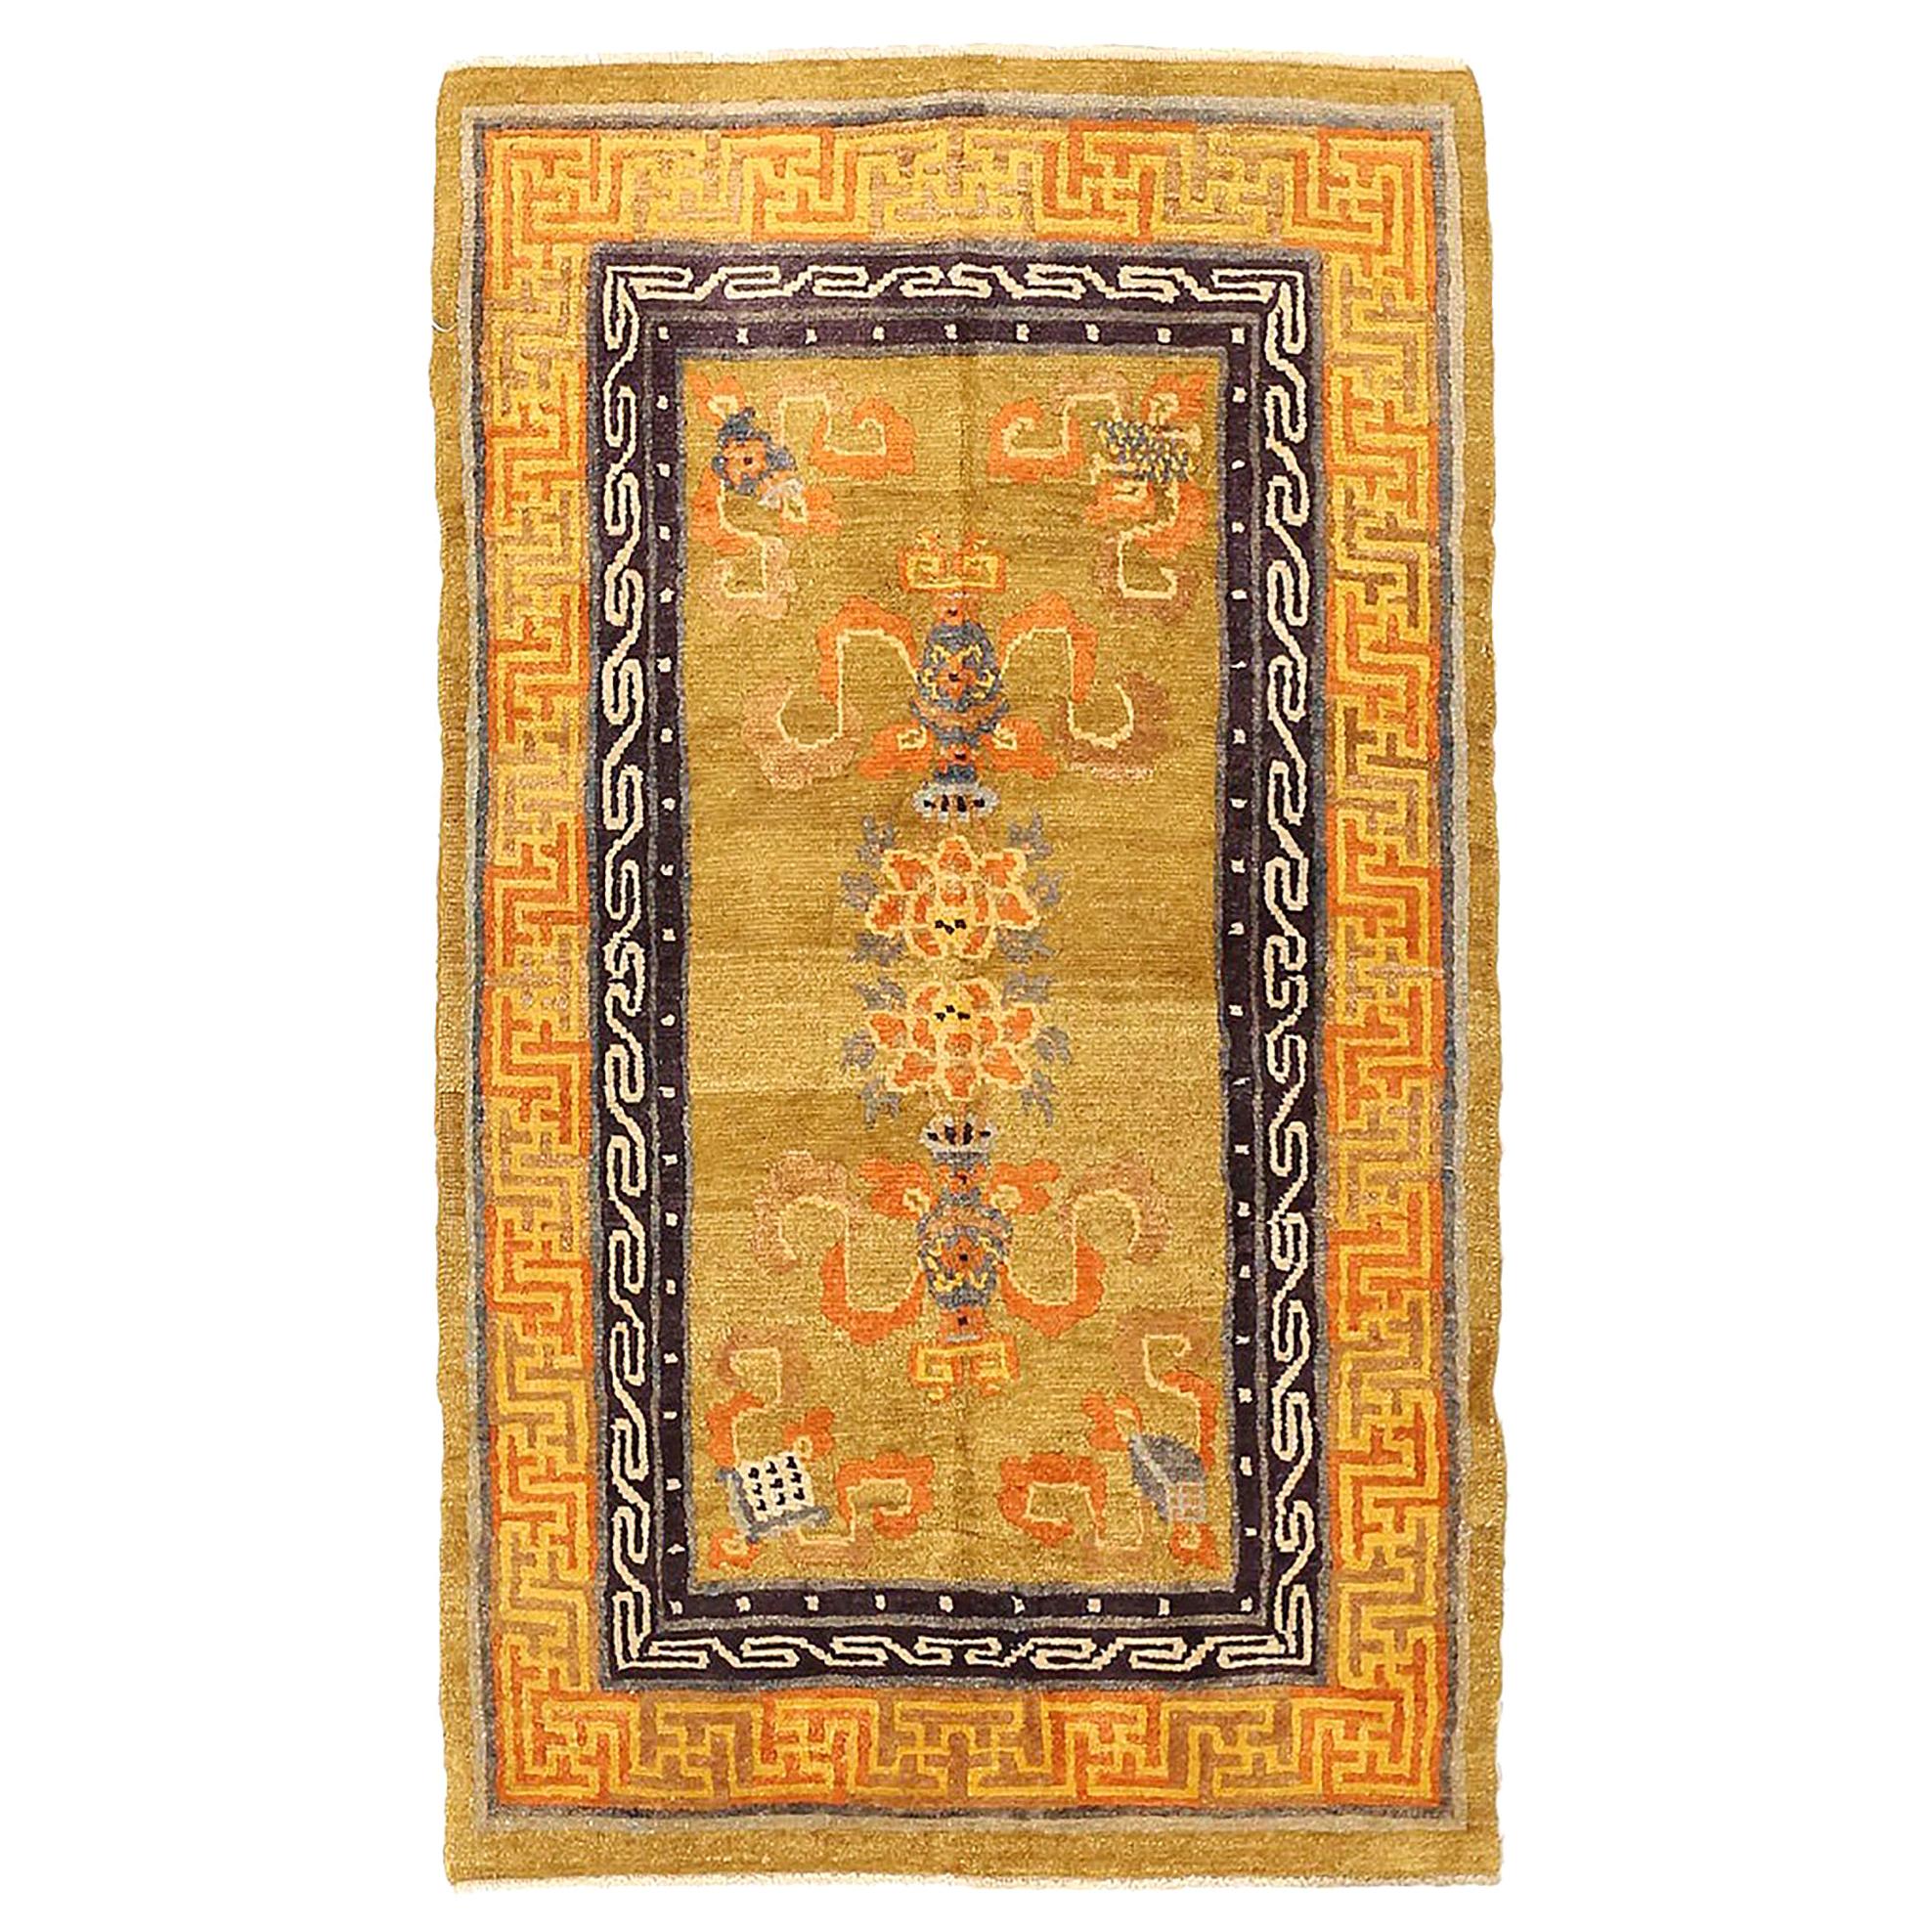 Antique Nepalese Rug with Modern Labyrinth Patterns in Rust and Brown